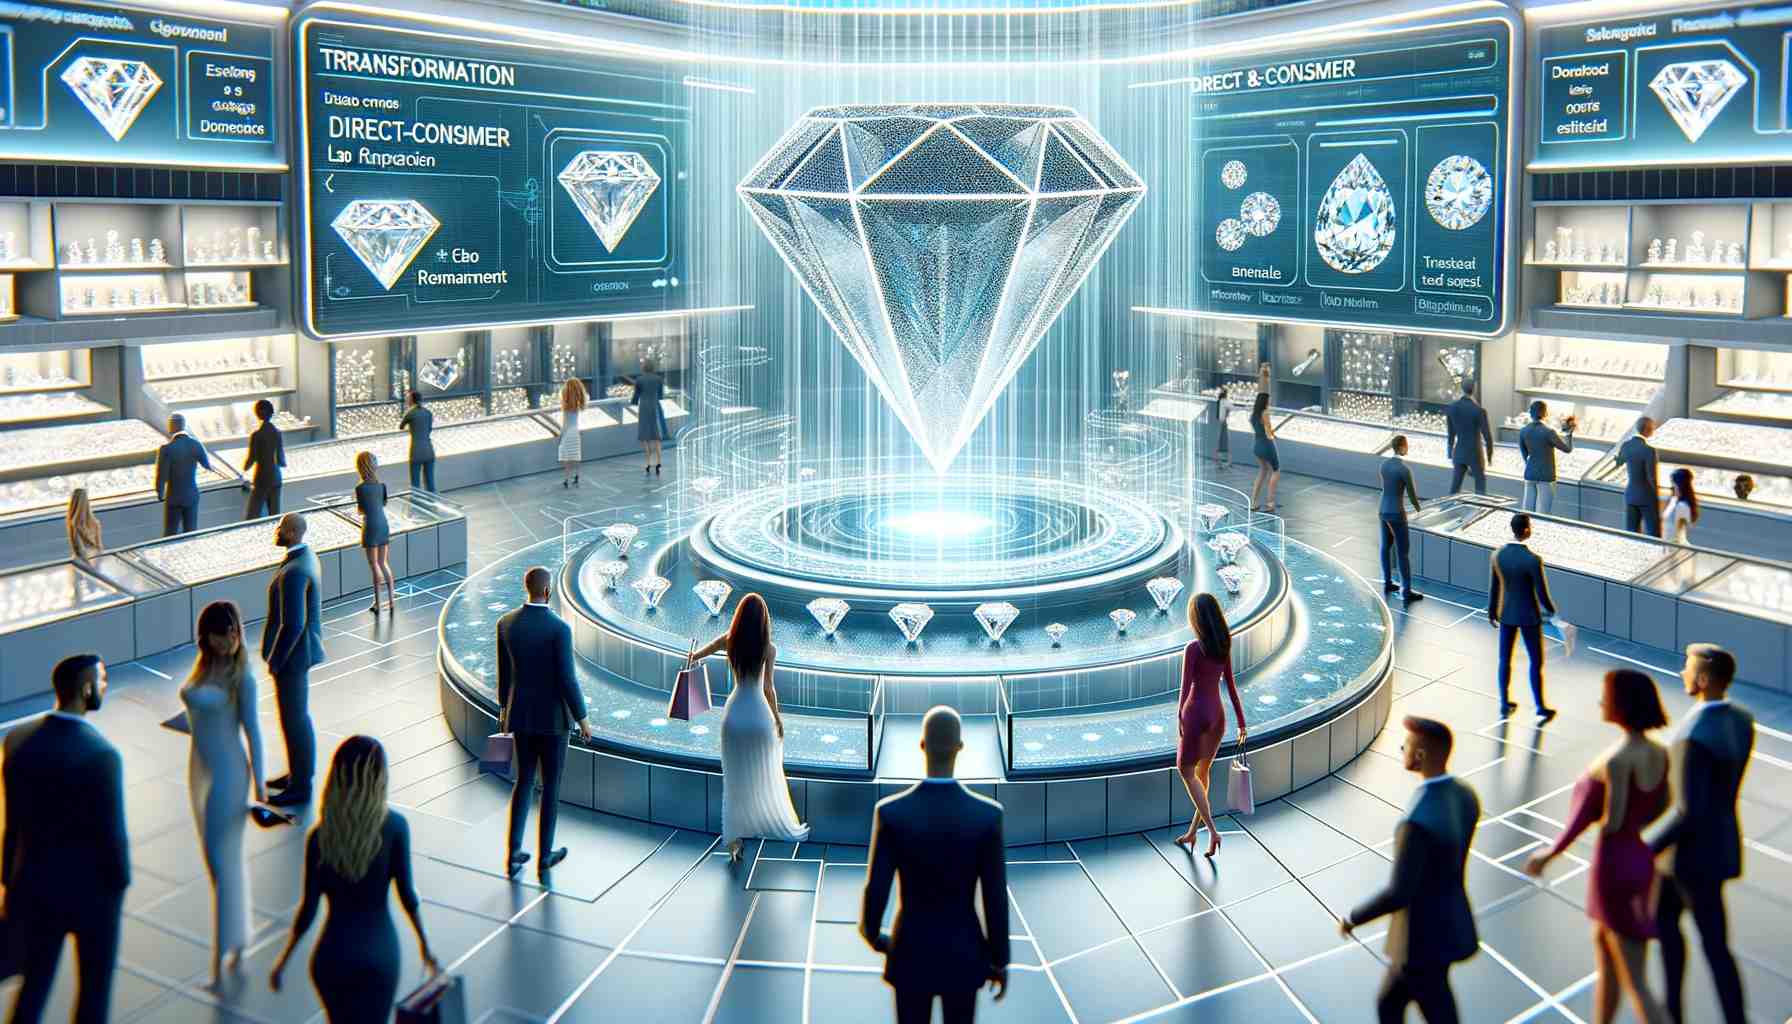 A futuristic and transparent marketplace for lab-grown diamonds, featuring diverse customers interacting with digital interfaces and experts in a sleek, modern environment, highlighting sustainable and ethical luxury.